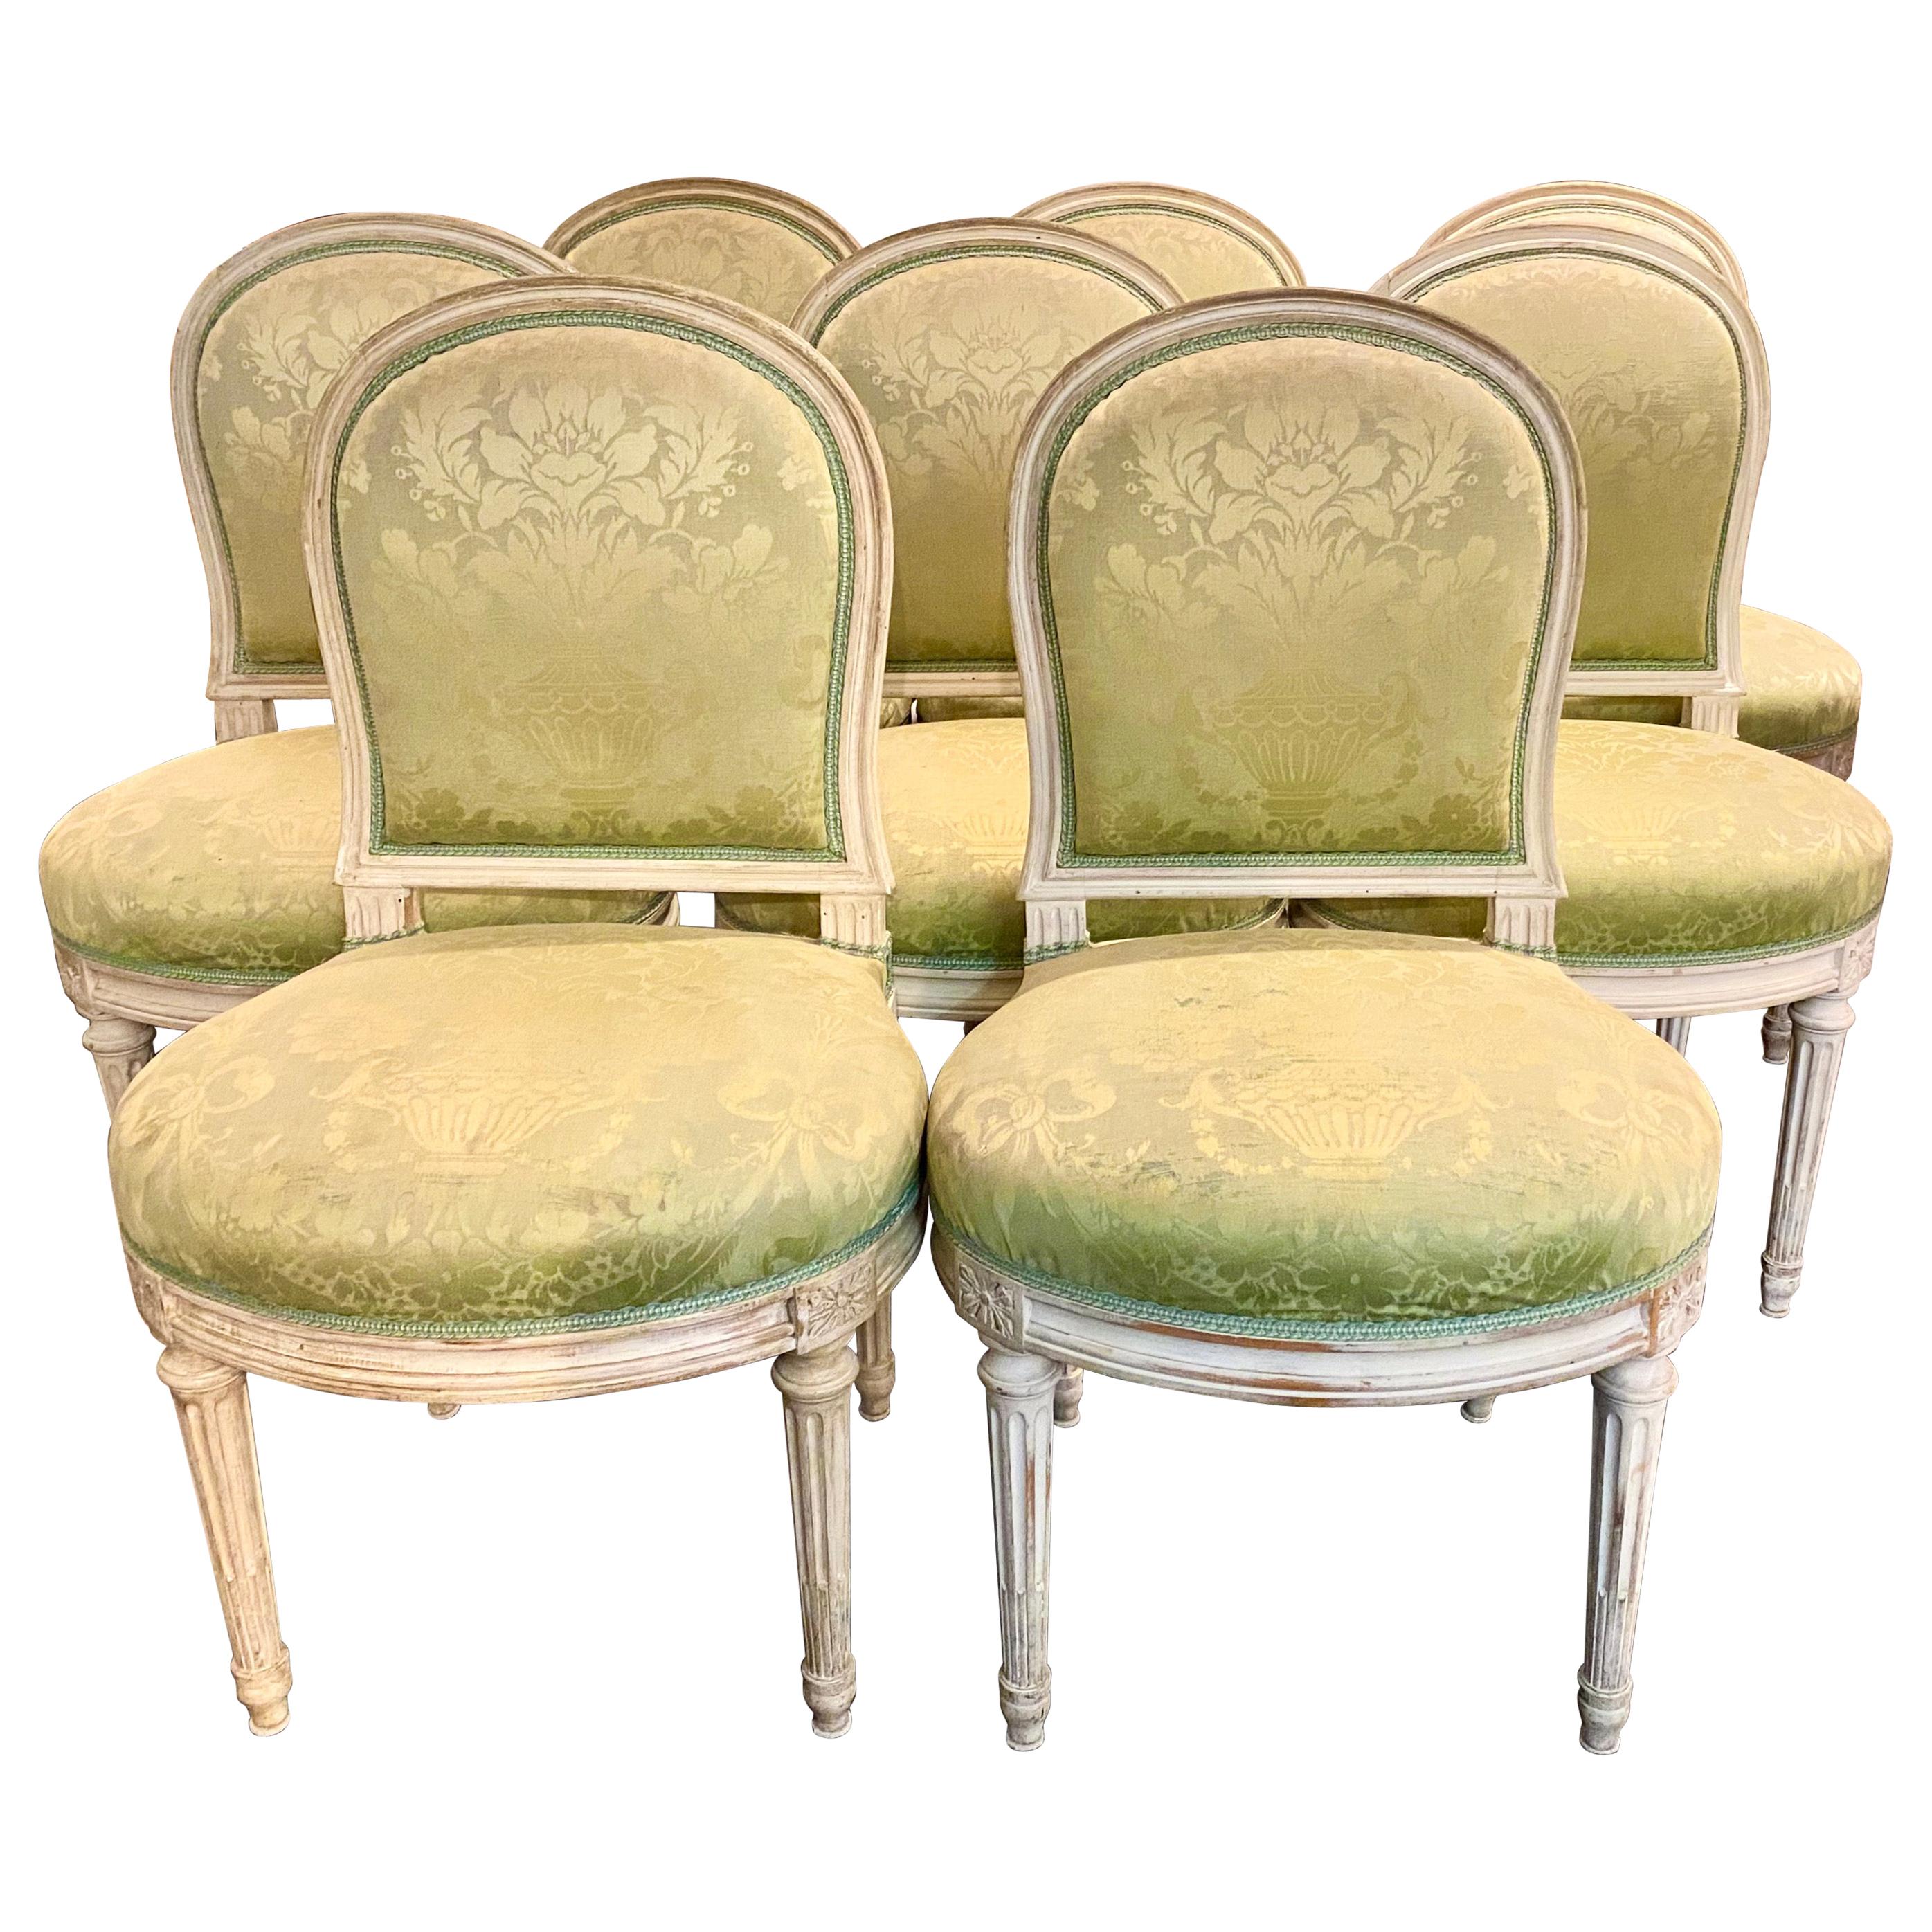 Set of 8 Louis XVI Style French Chairs